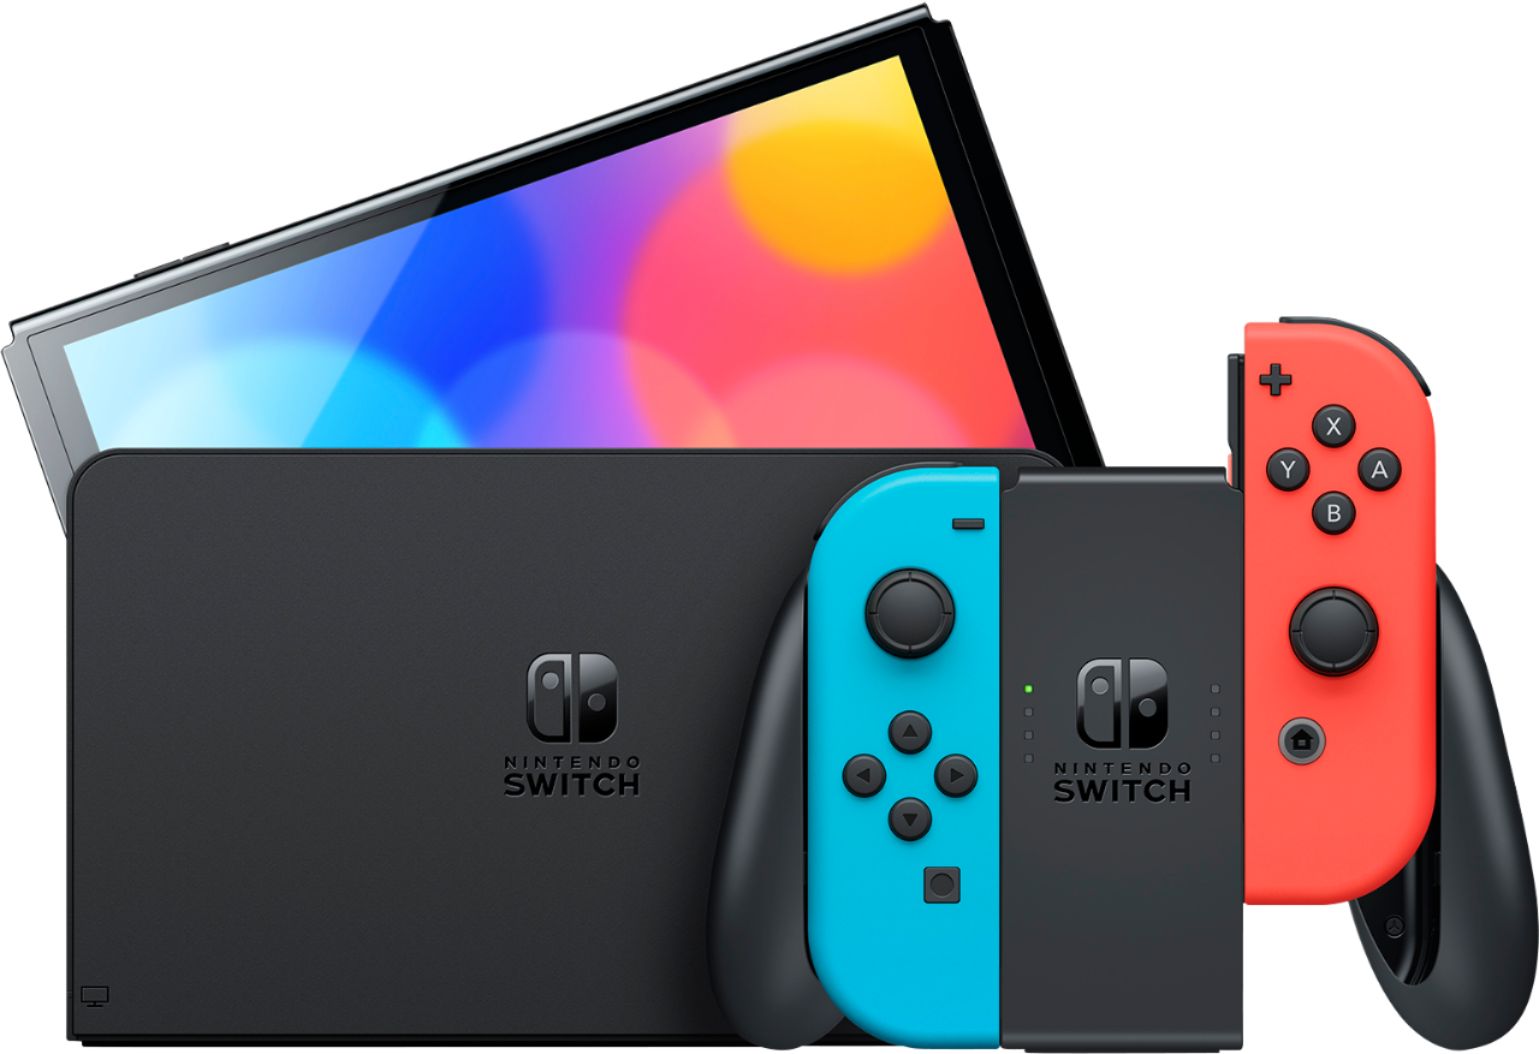 2022 New Nintendo Switch OLED Model Neon Red Blue Joy Con 64GB Console Improved HD Screen & LAN-Port Dock with Triangle Strategy, Mytrix 128GB MicroSD Card and Accessories